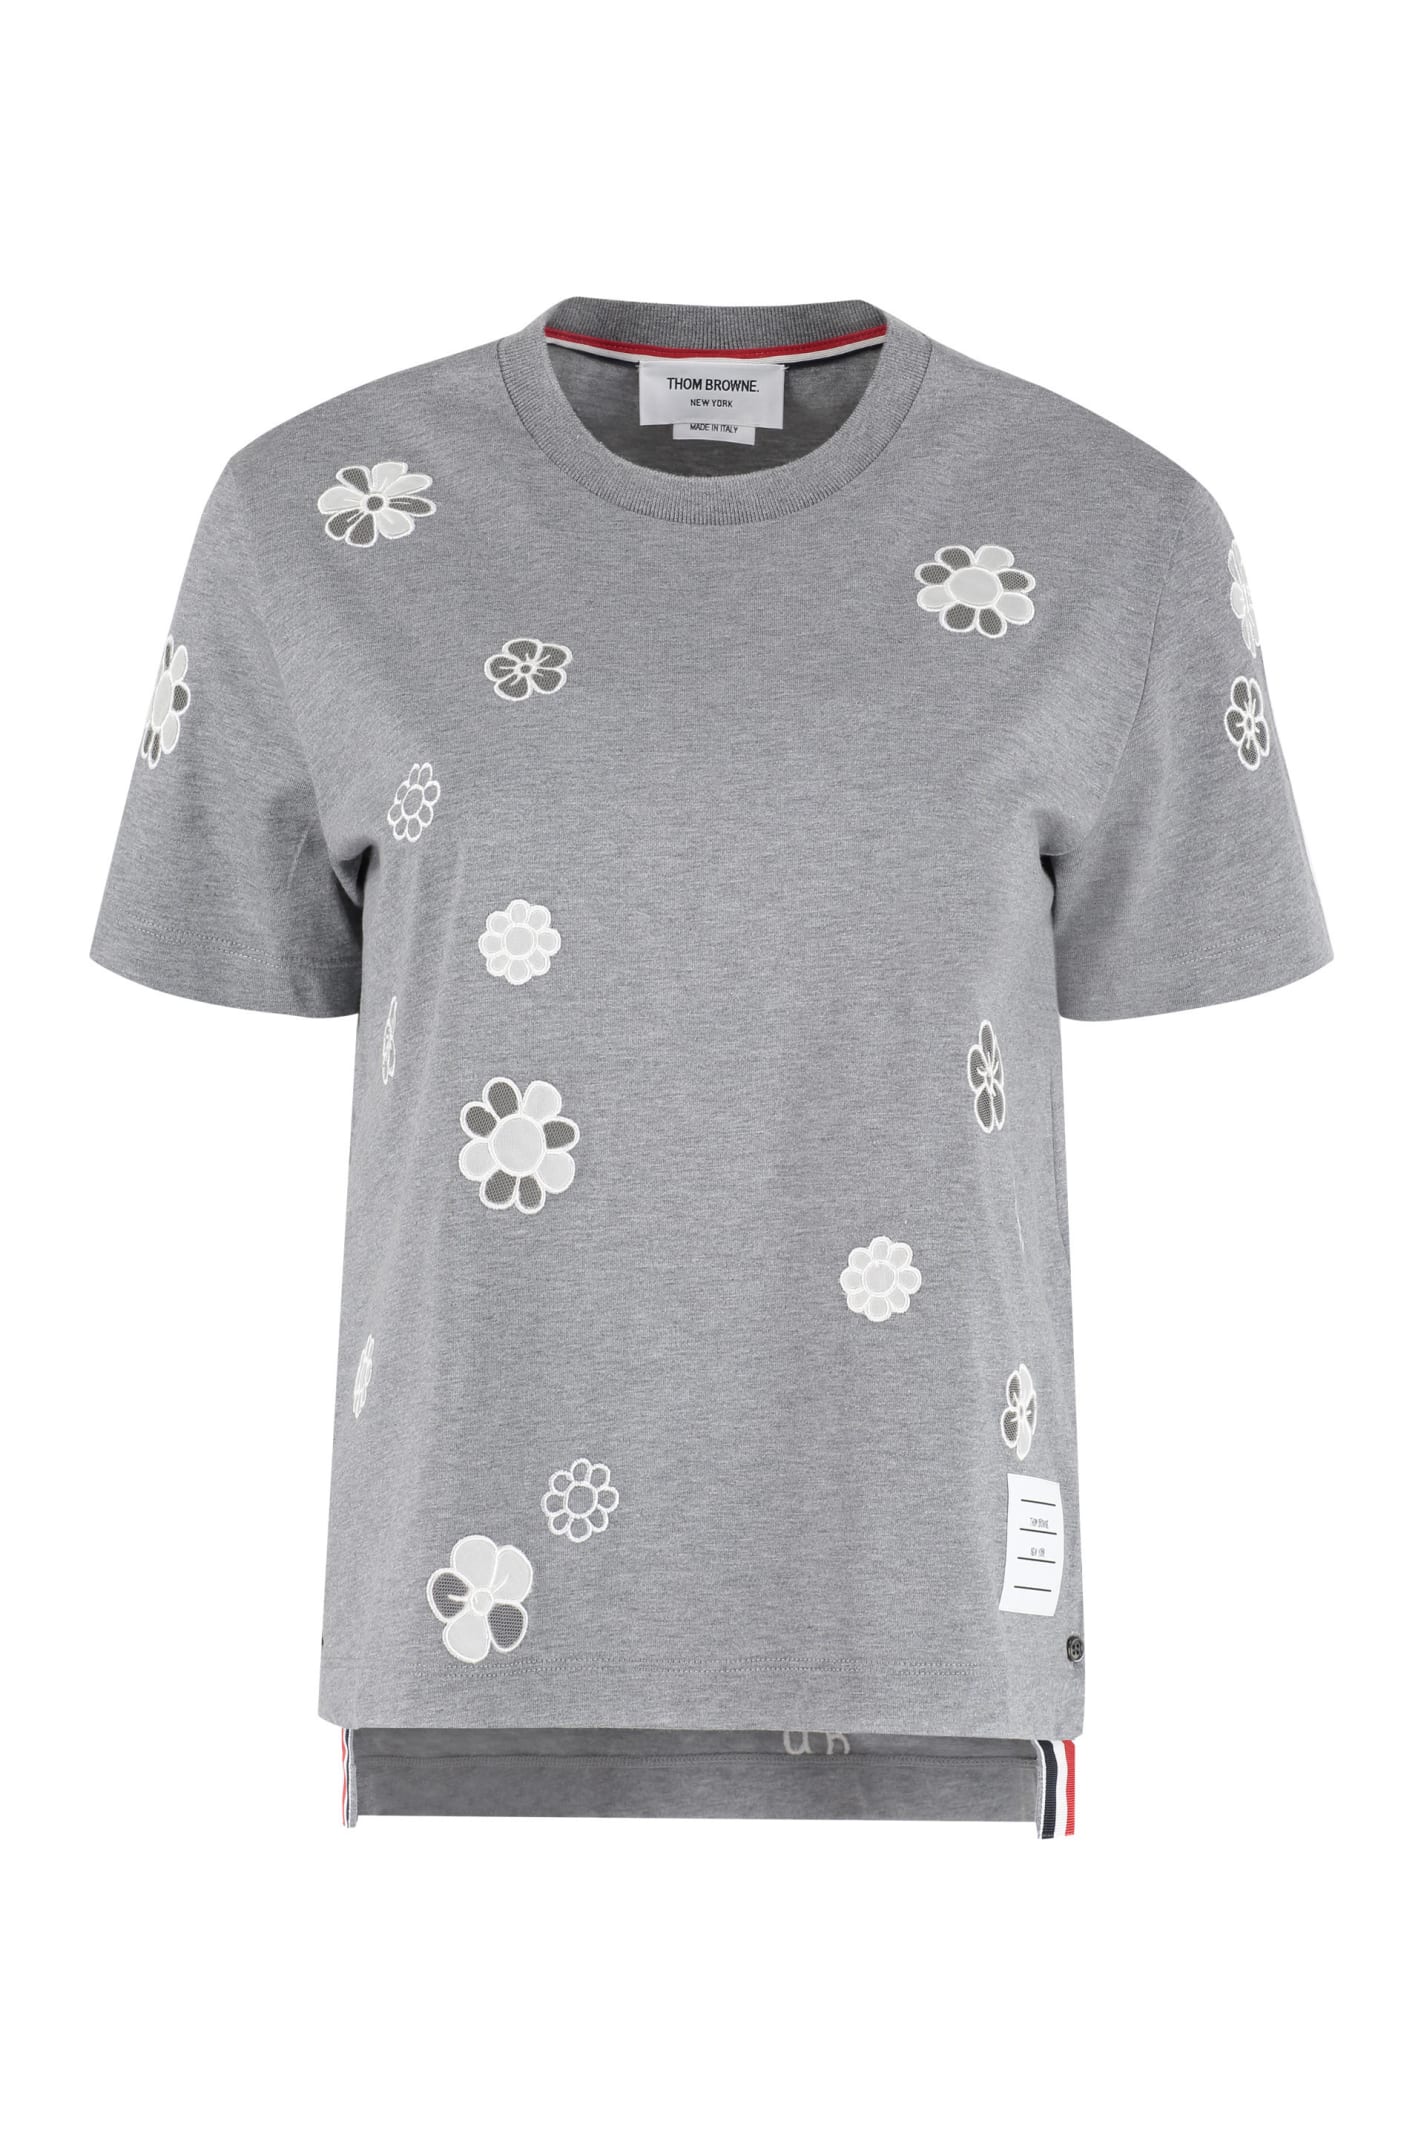 Thom Browne Embroidered Cotton T-shirt